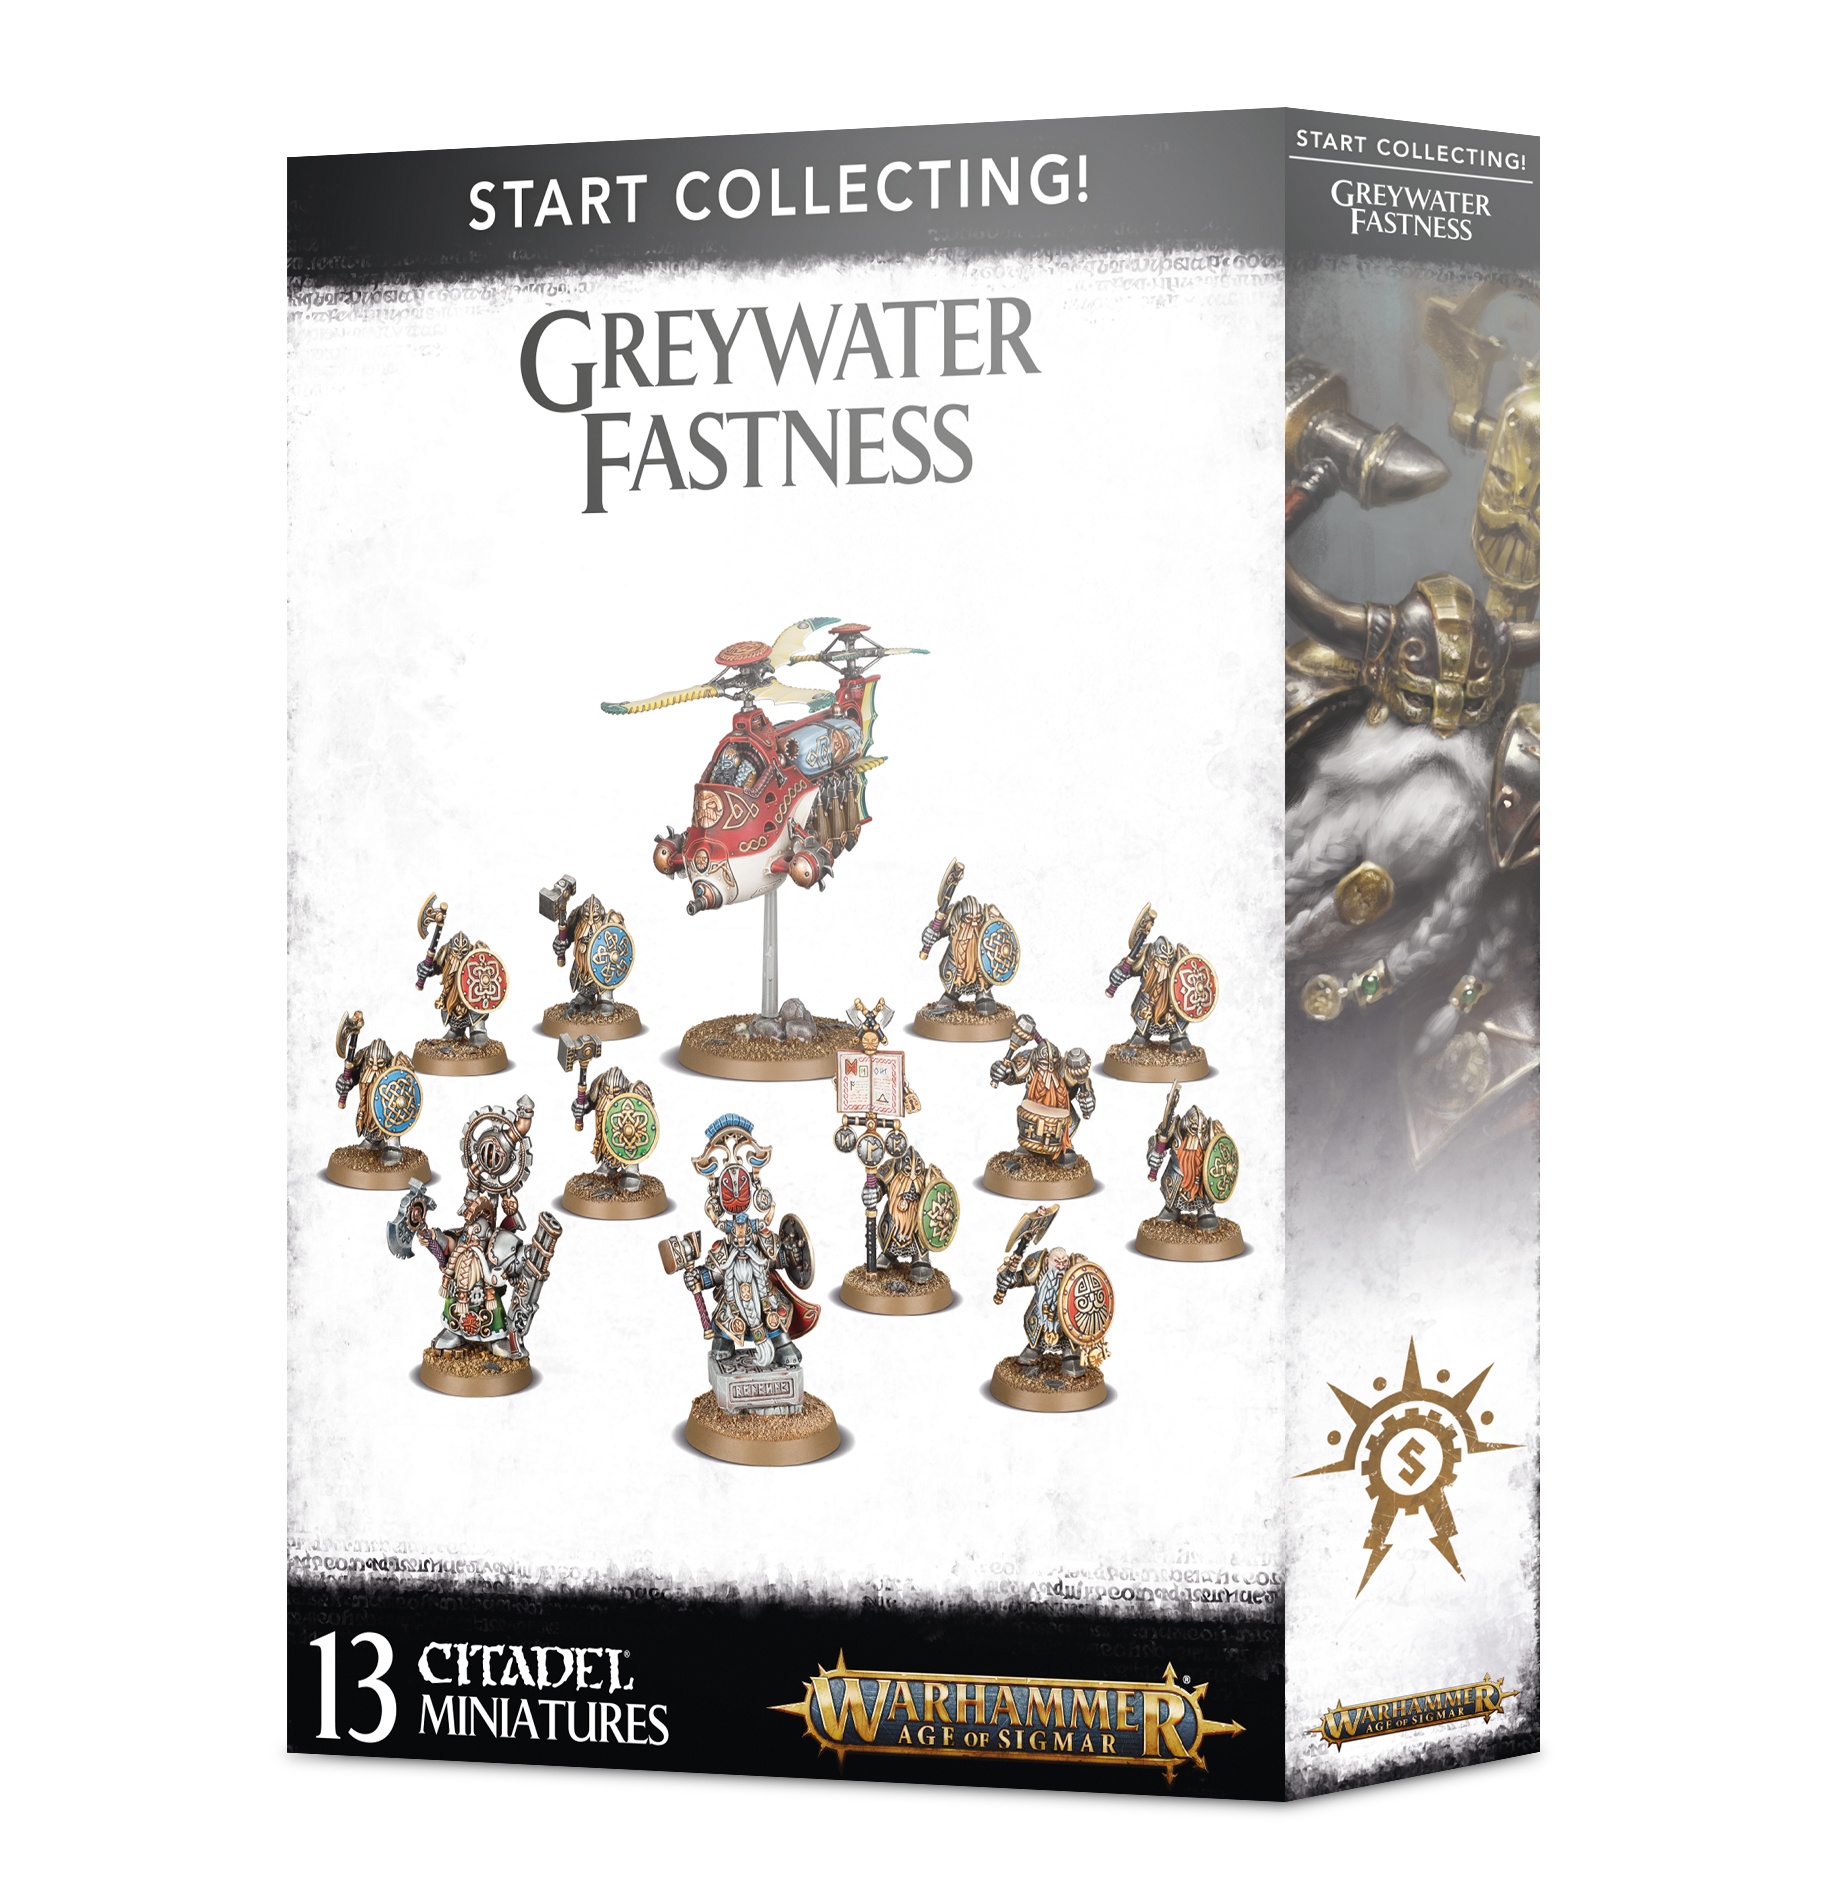 Warhammer Age of Sigmar: Start Collecting! Greywater Fastness 